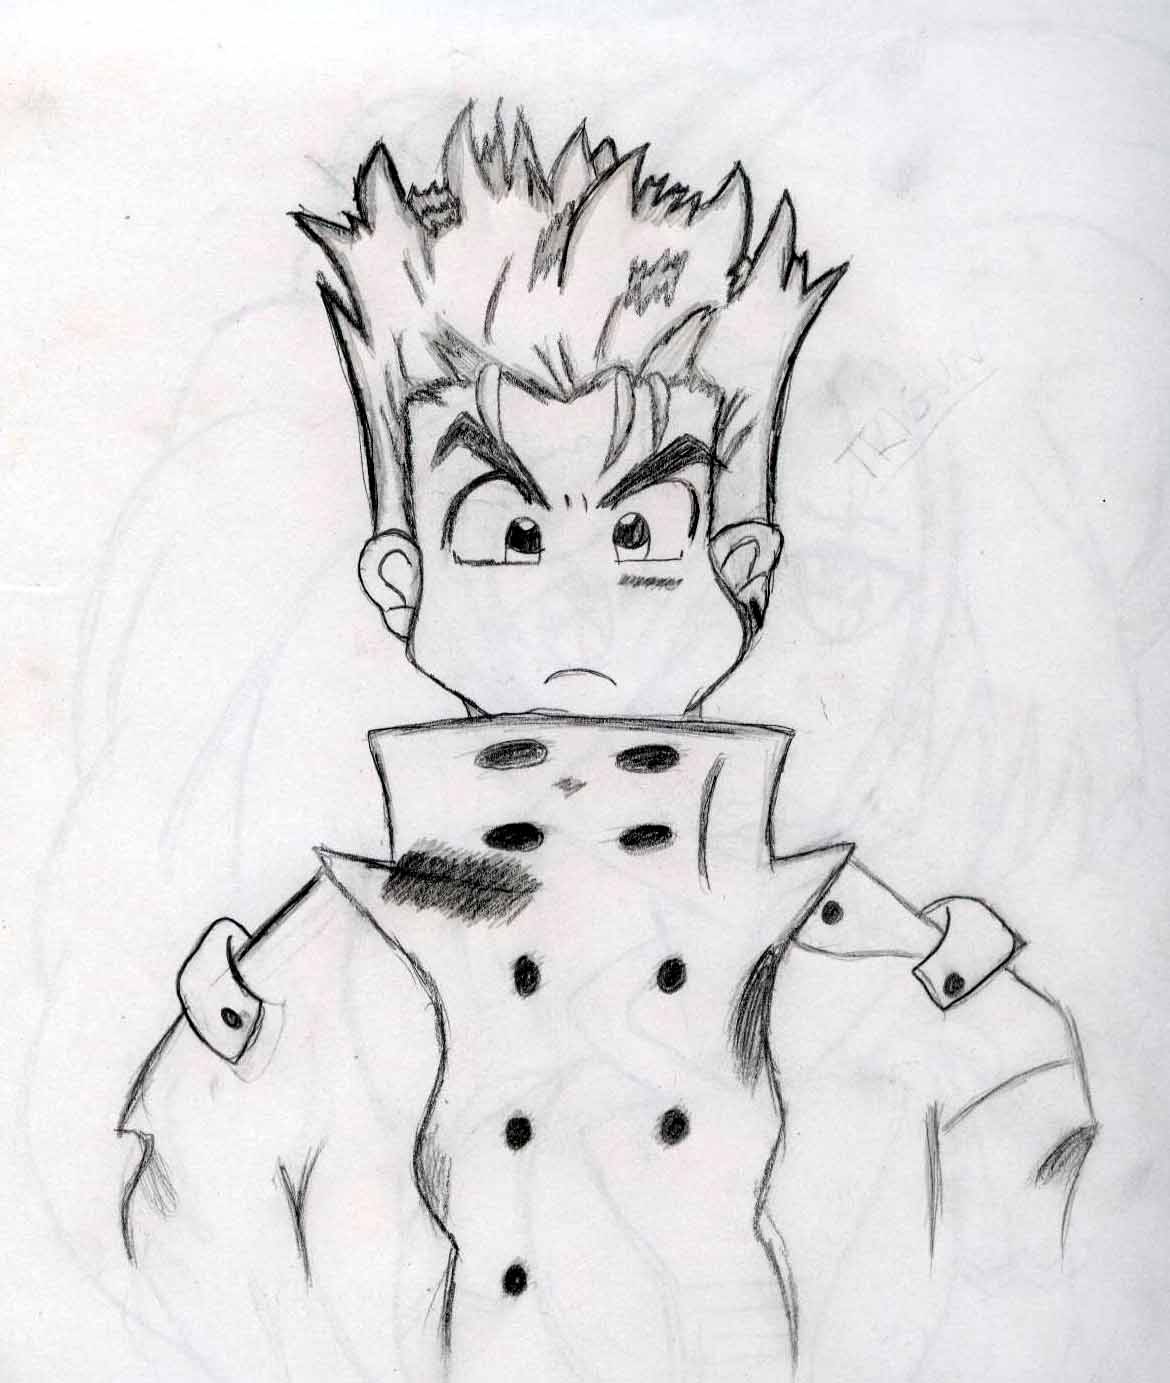 Vash The Stampede by animeash